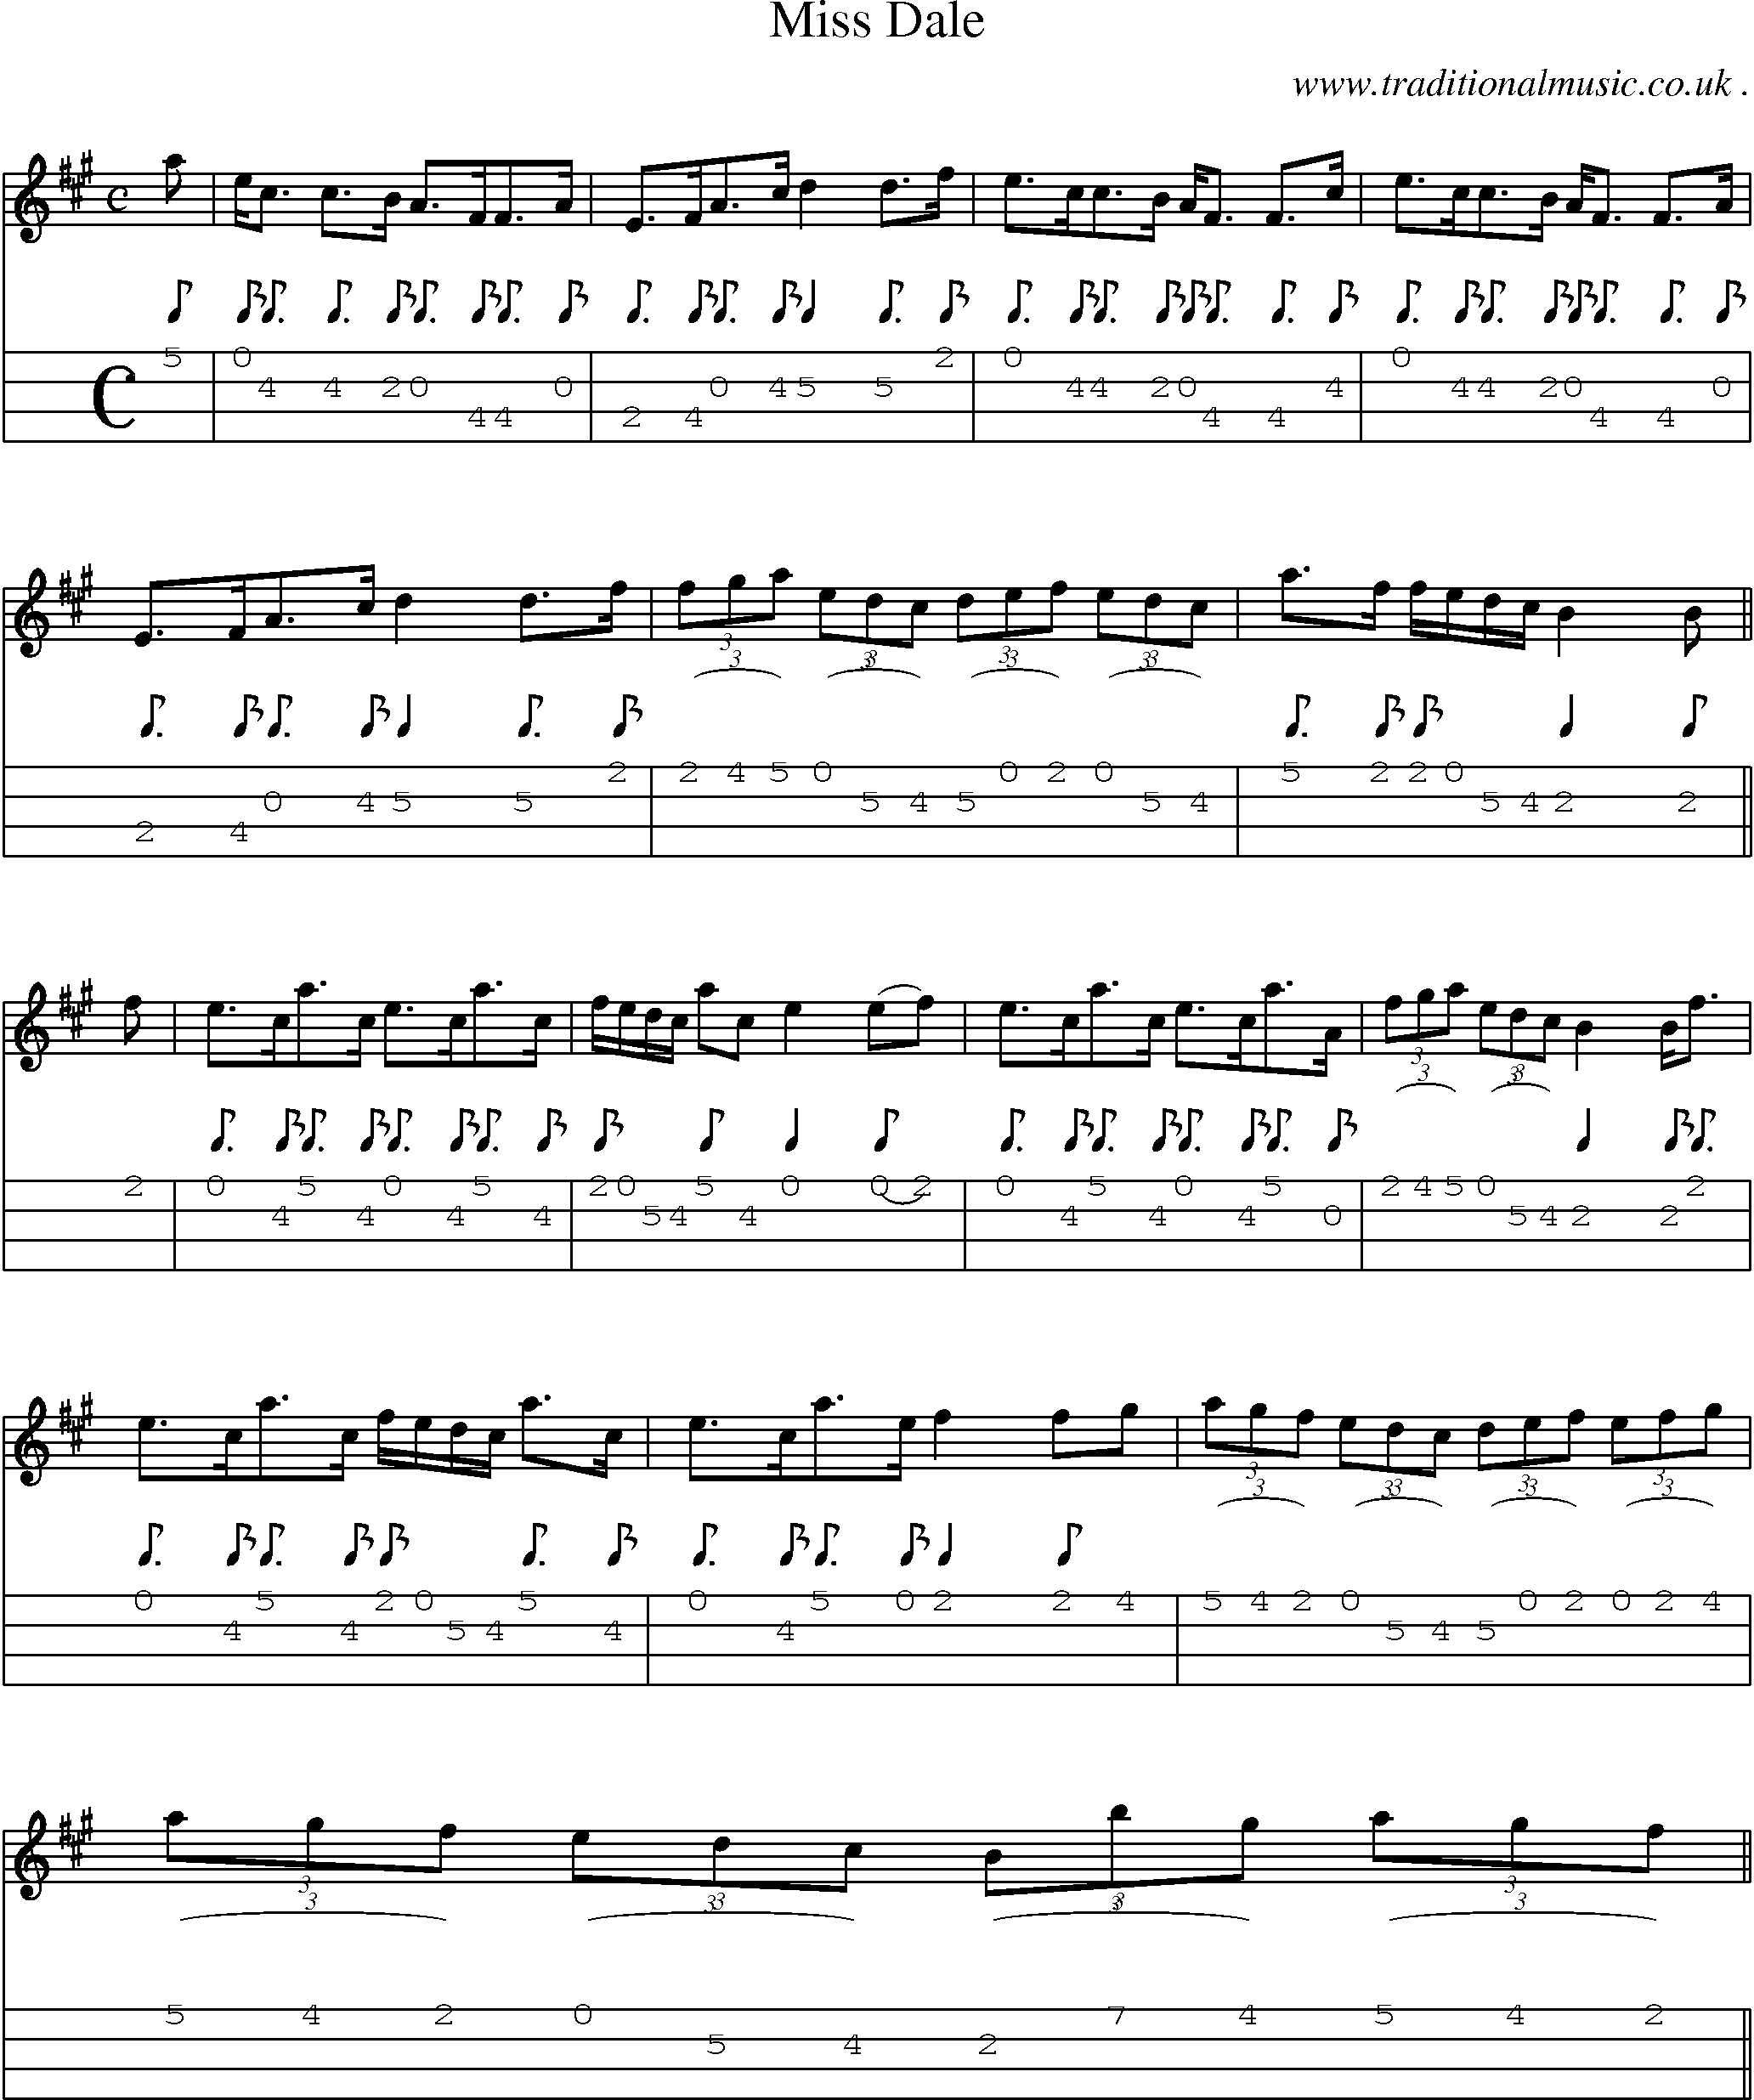 Sheet-music  score, Chords and Mandolin Tabs for Miss Dale